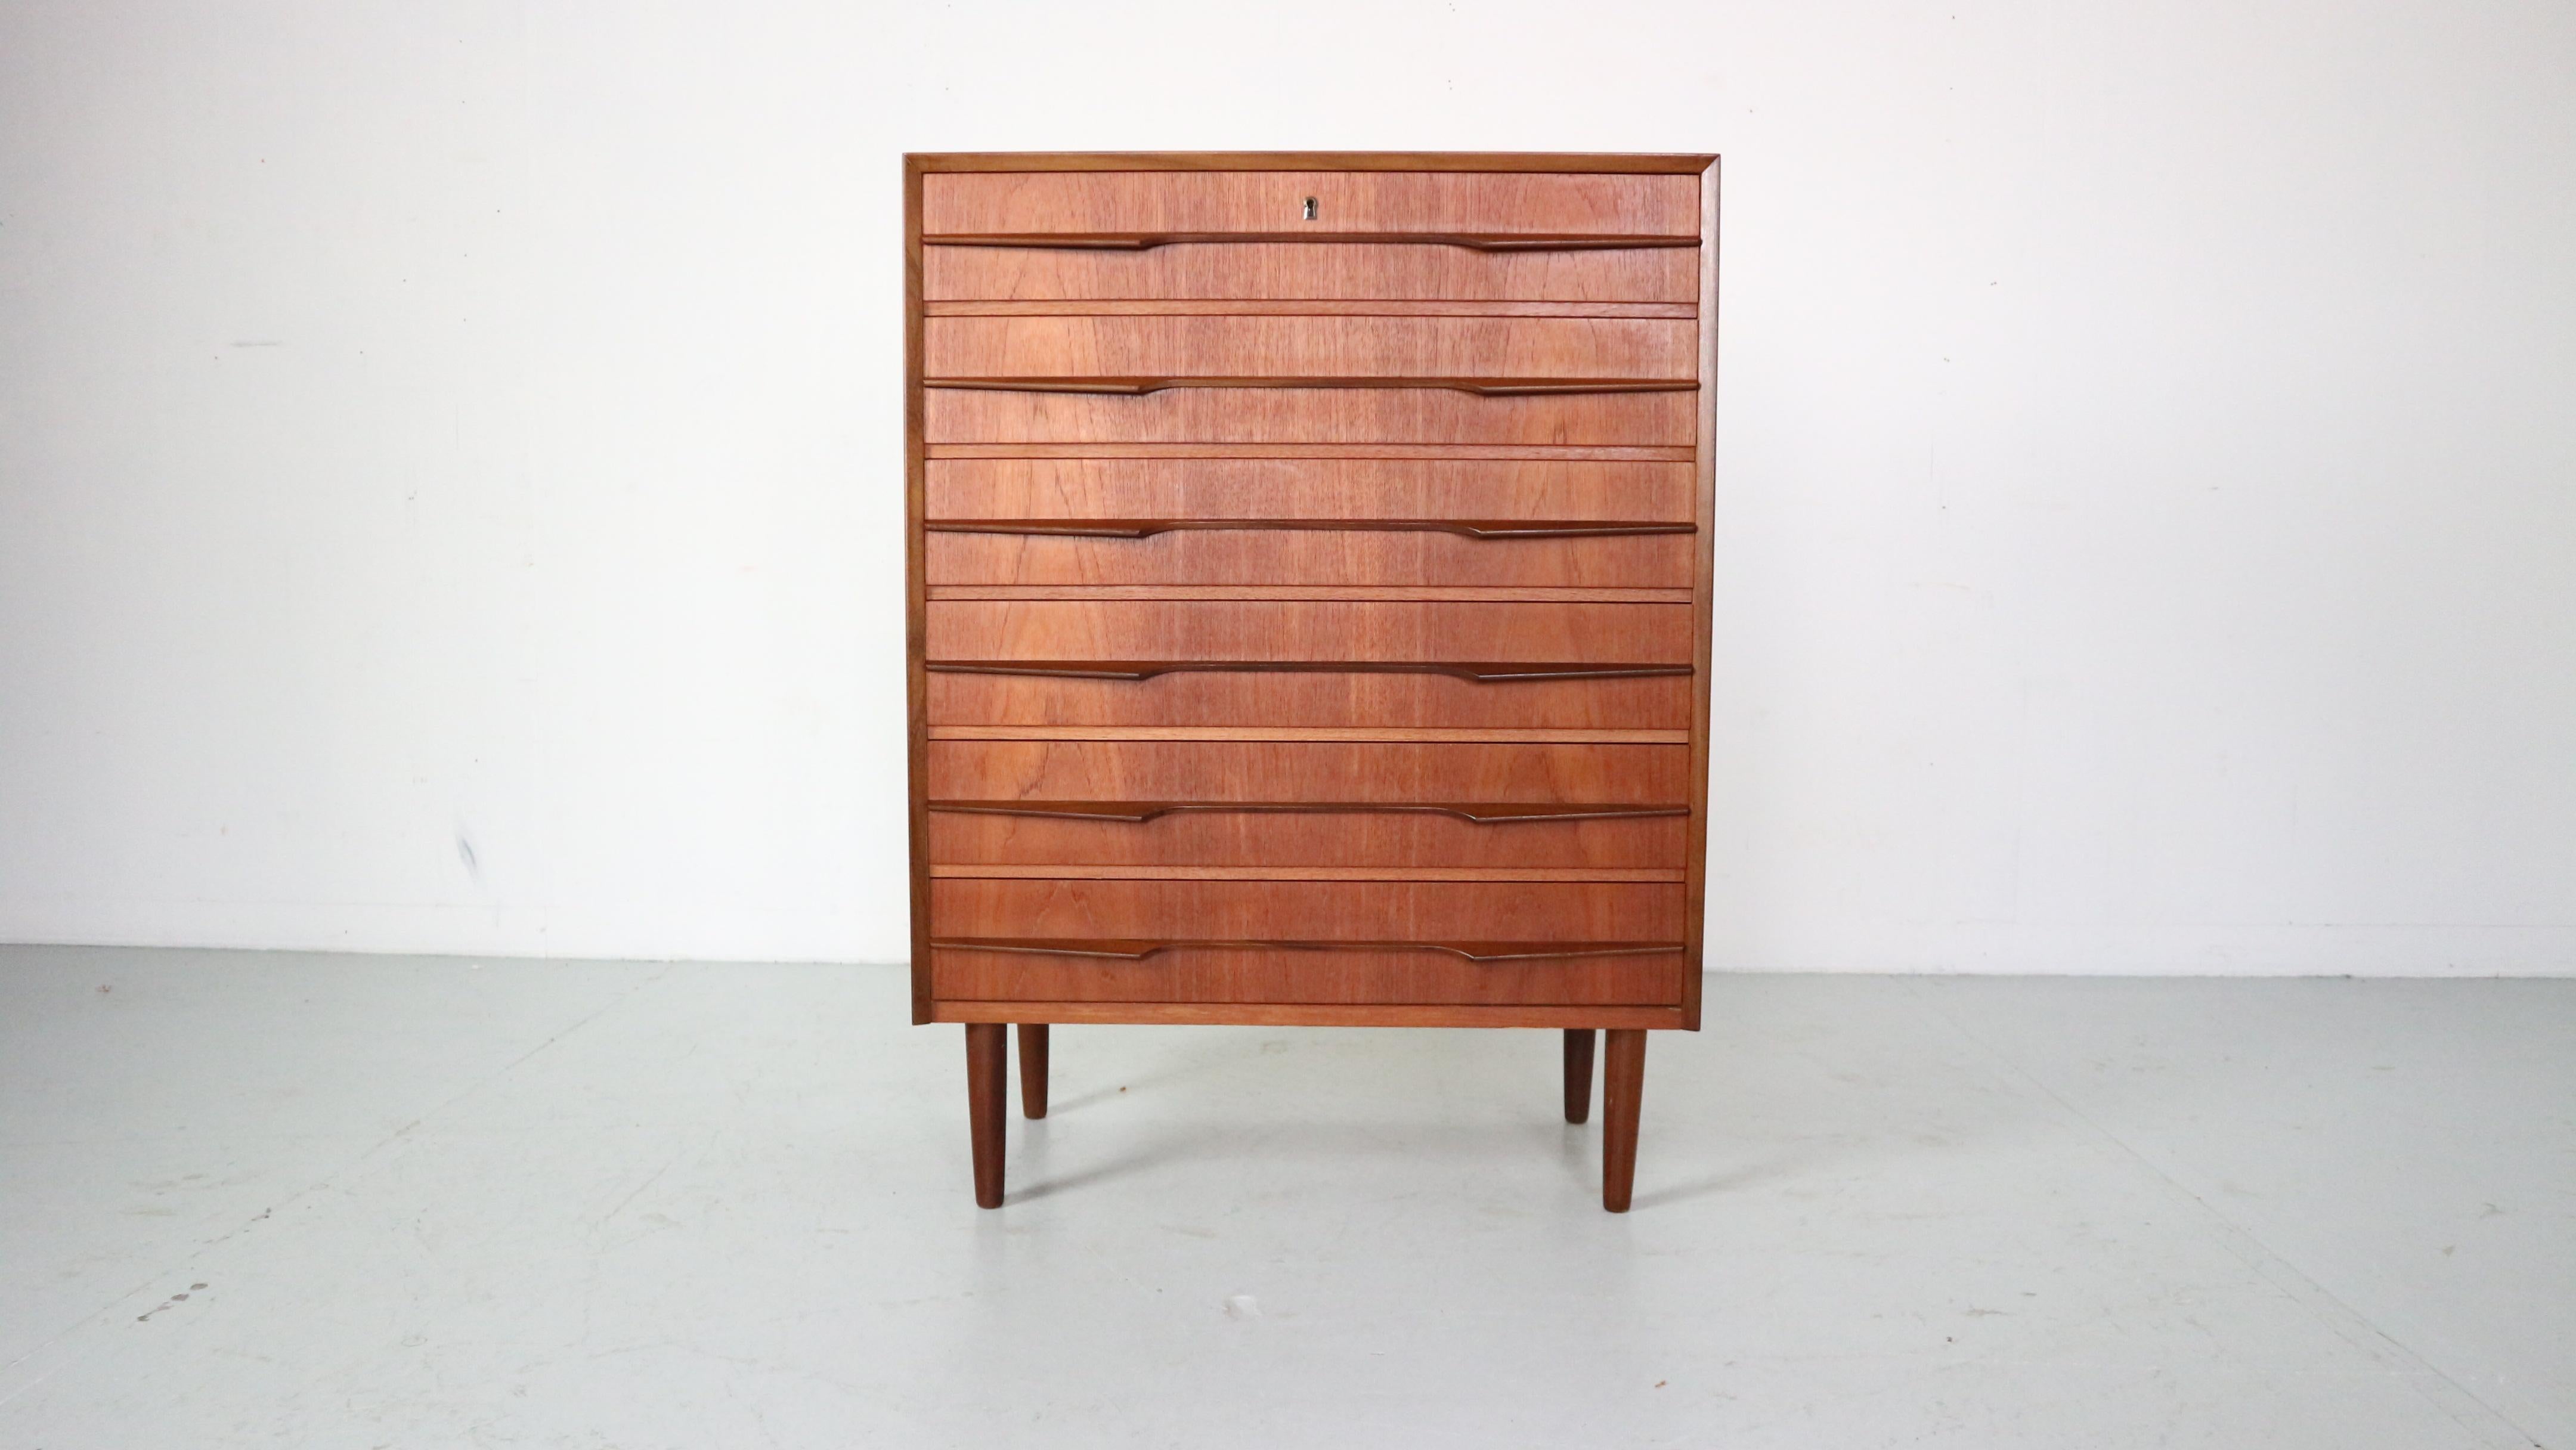 Mid- Century modern period chest of 6 drawers or tallboy cabinet made in 1960's Denmark.

Made of teak wood veneer. Elegant handles from both sides.
High quality Danish furniture.

The cabinet is in a good vintage condition.
It has been